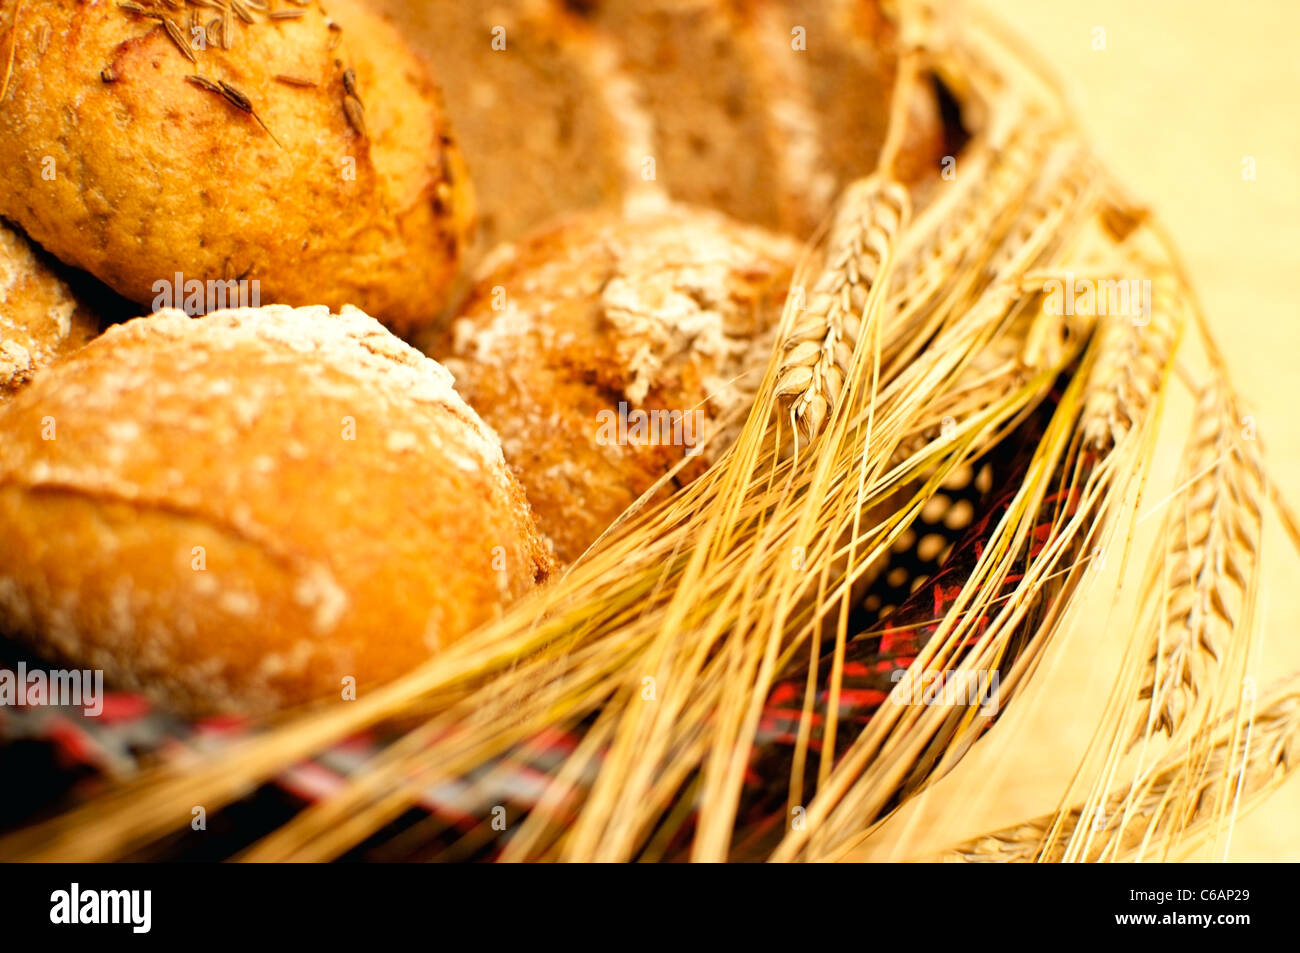 Wholegrain Bread and Buns with ears of wheat and barley Stock Photo